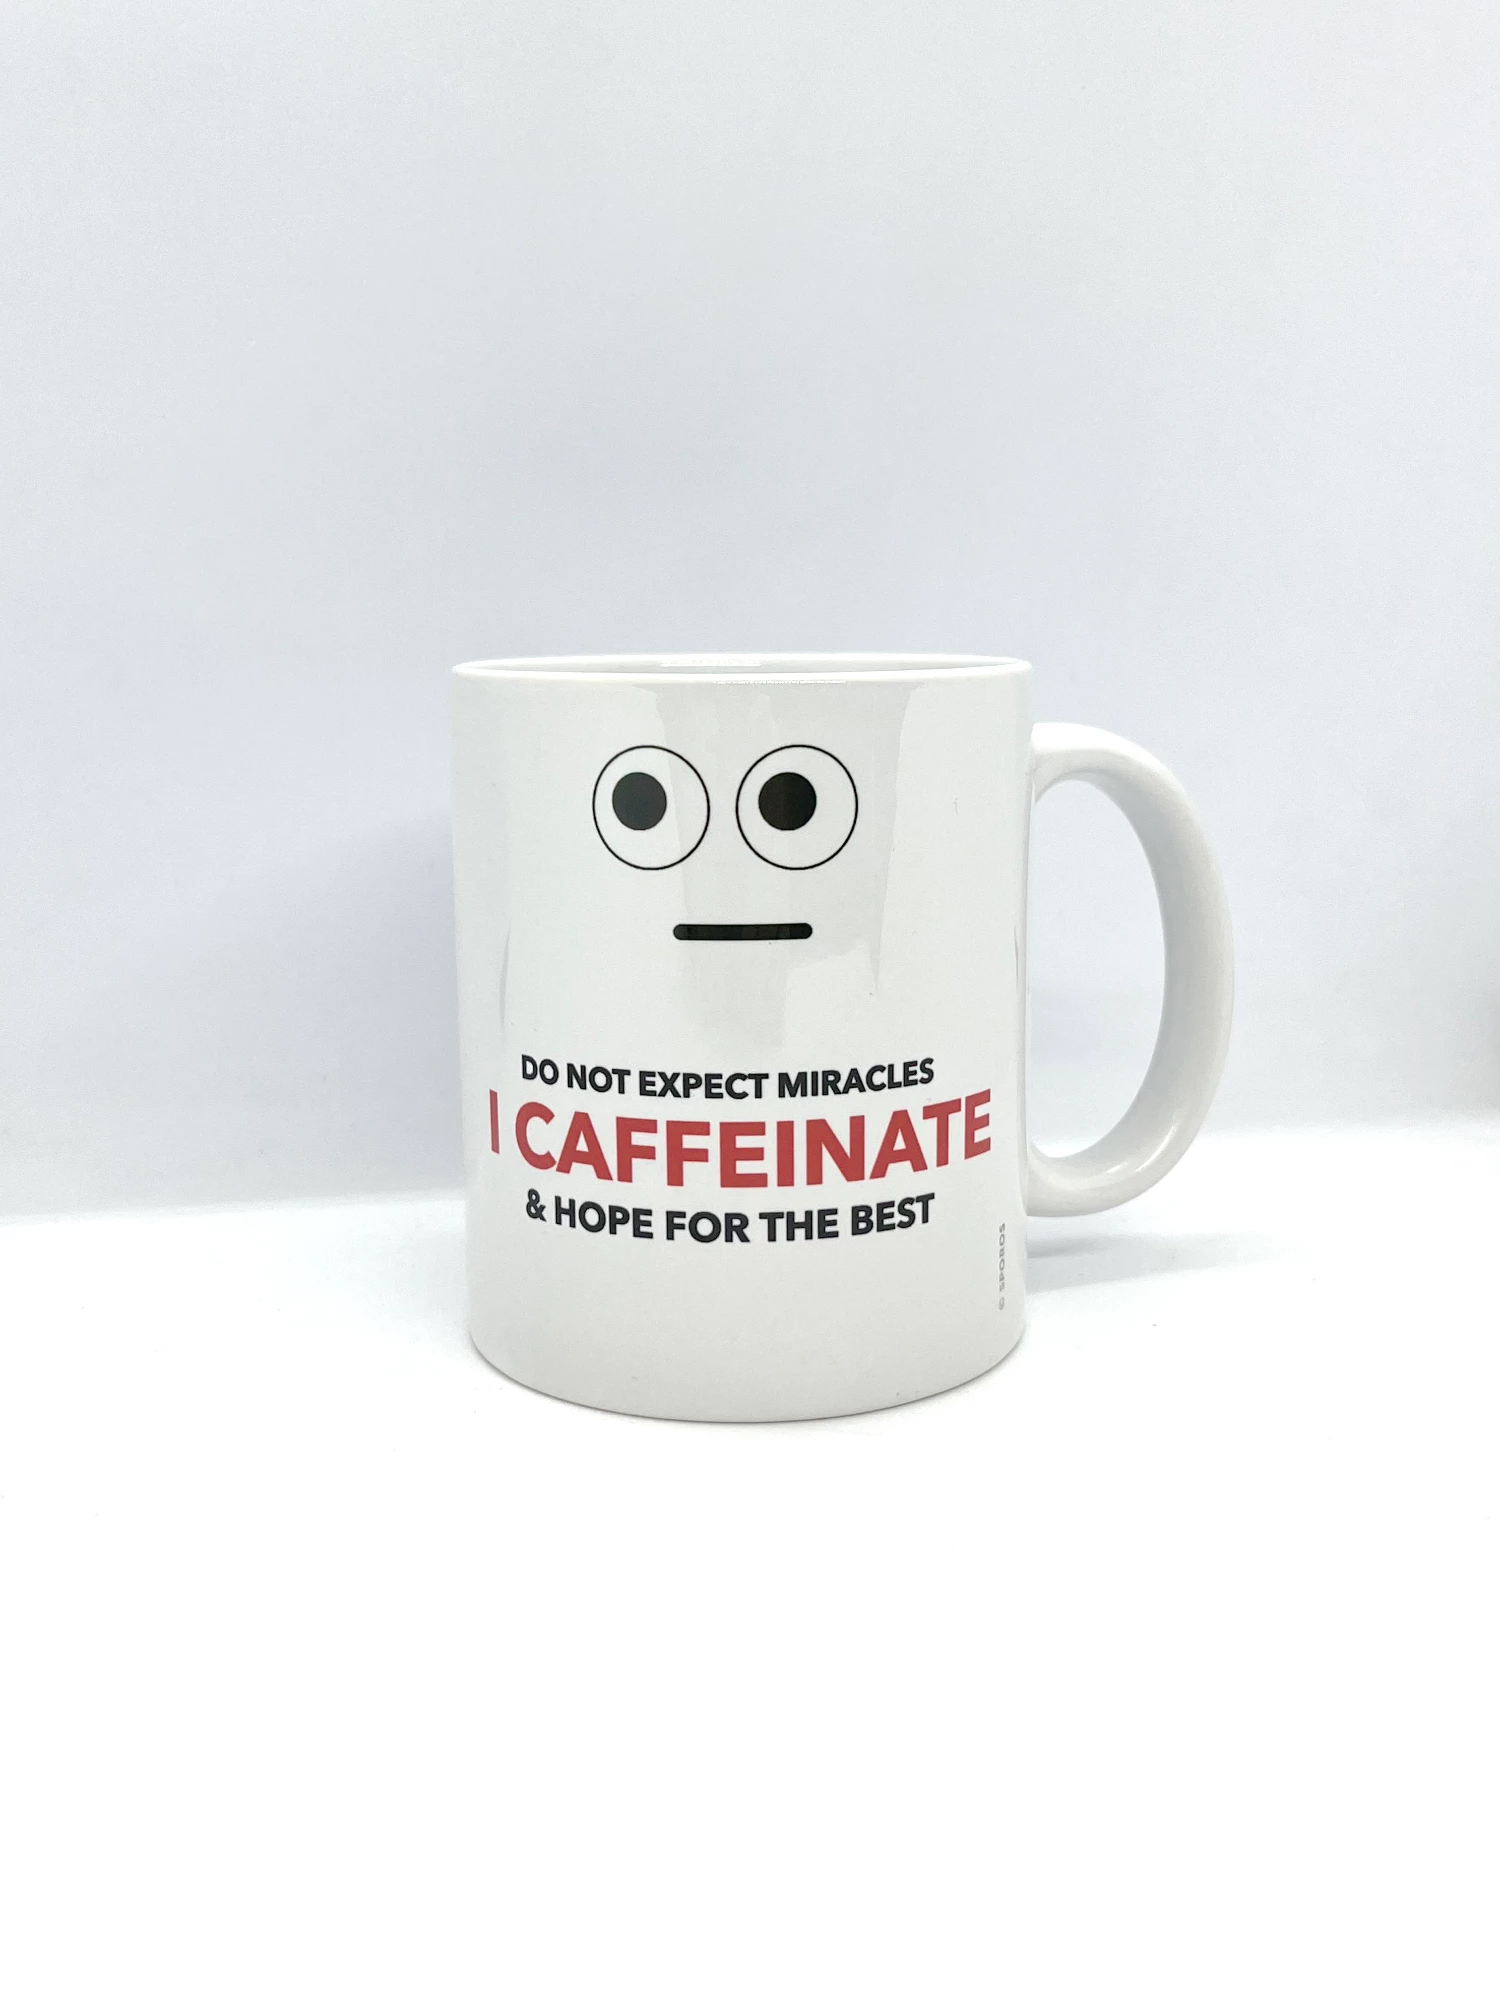 Coffee mug, not for early morning lovers!